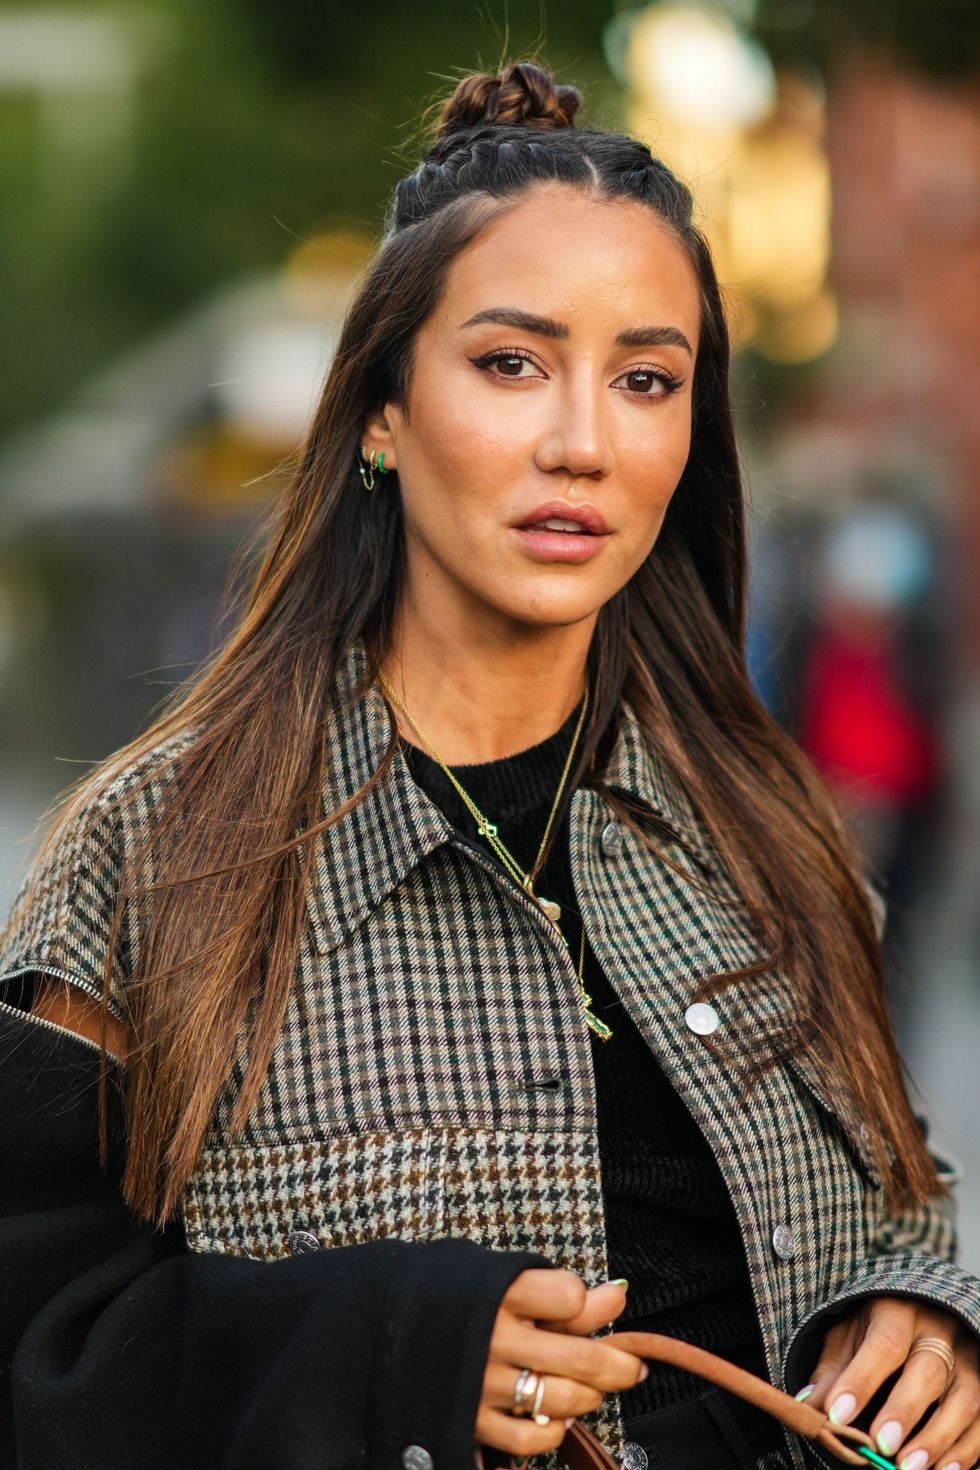 paris, france   september 29 tamara kalinic wears gold chain pendant necklaces, a brown  beige  black checkered pattern buttoned jacket with a black zipper sleeve and a matching pattern zipper sleeve, a matching brown  beige  black checkered pattern short skirt, a brown faded suede handbag from acne studio, rings, outside acne studios , during paris fashion week   womenswear spring summer 2022, on september 29, 2021 in paris, france photo by edward berthelotgetty images